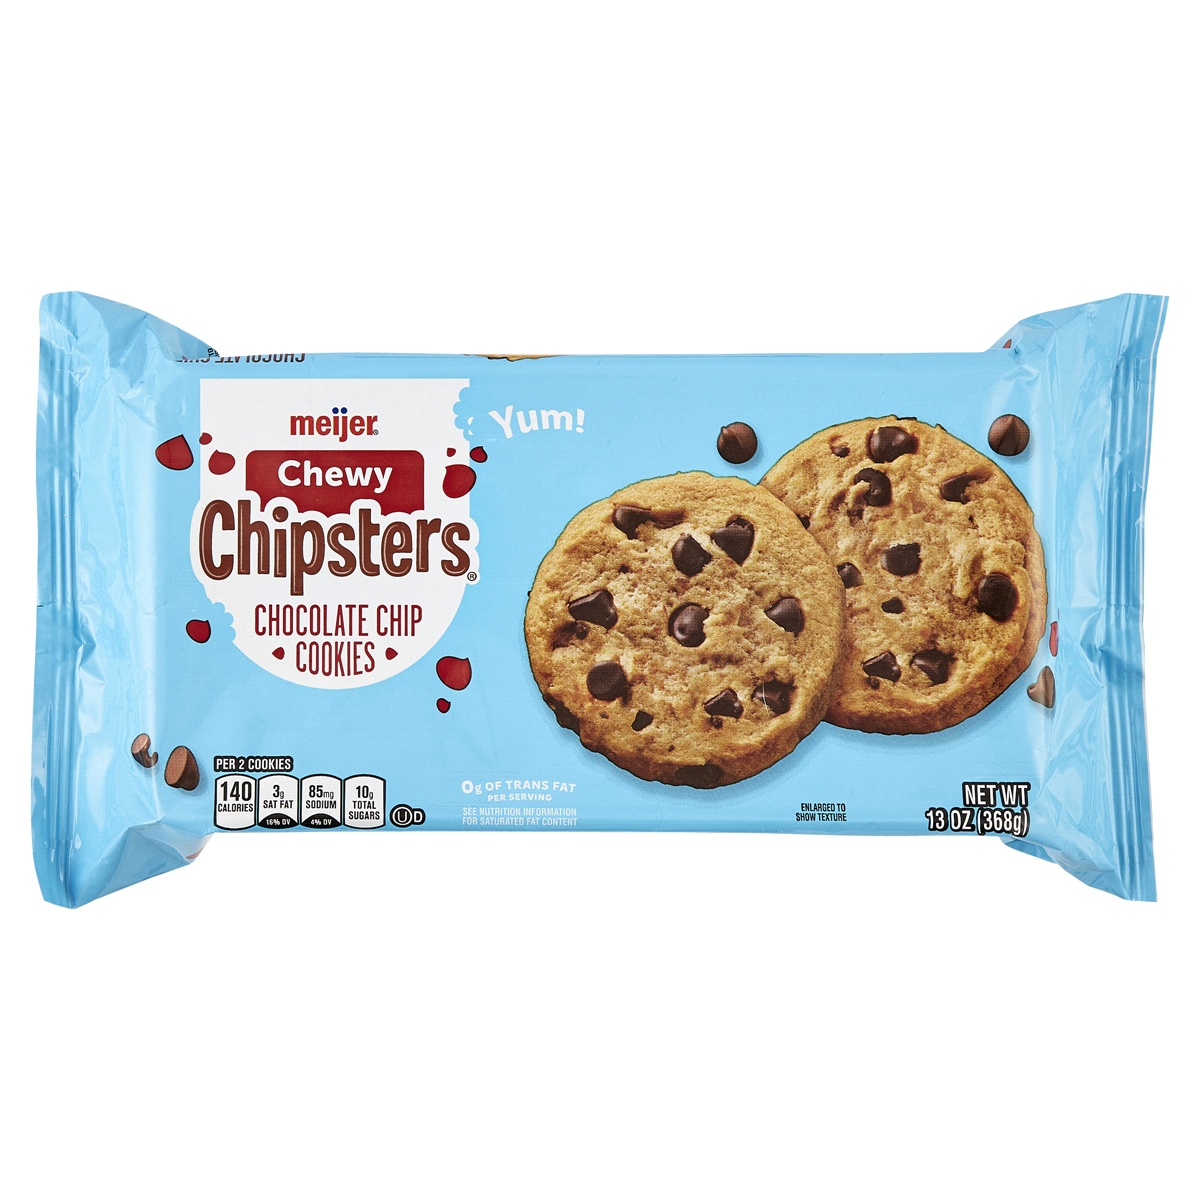 Meijer Chewy Chipsters Chocolate Chip Cookies 13 OZ | Shipt